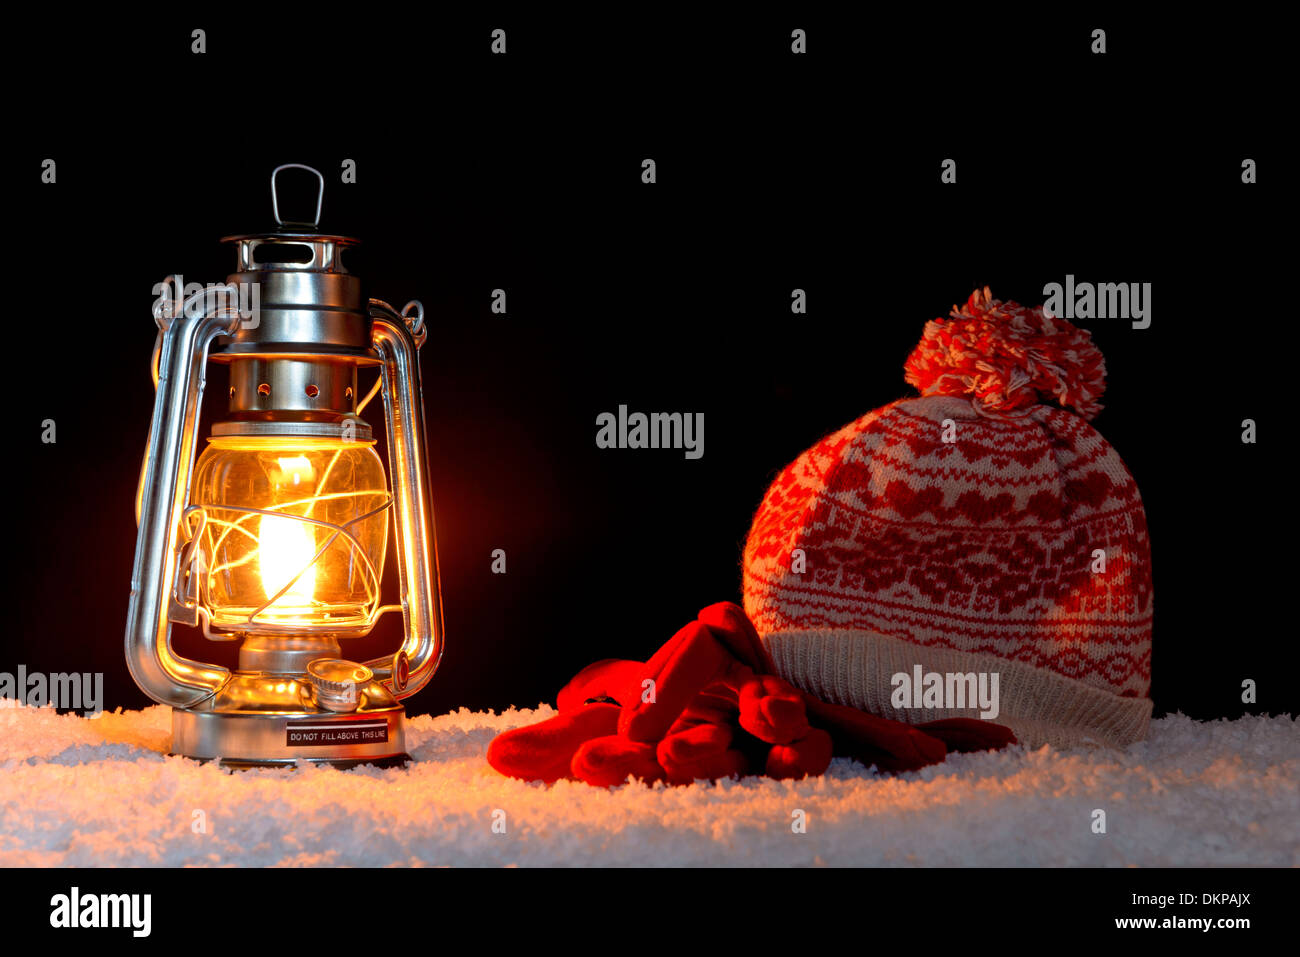 An oil filled lantern on snow with a bobble hat and gloves, black background. Stock Photo